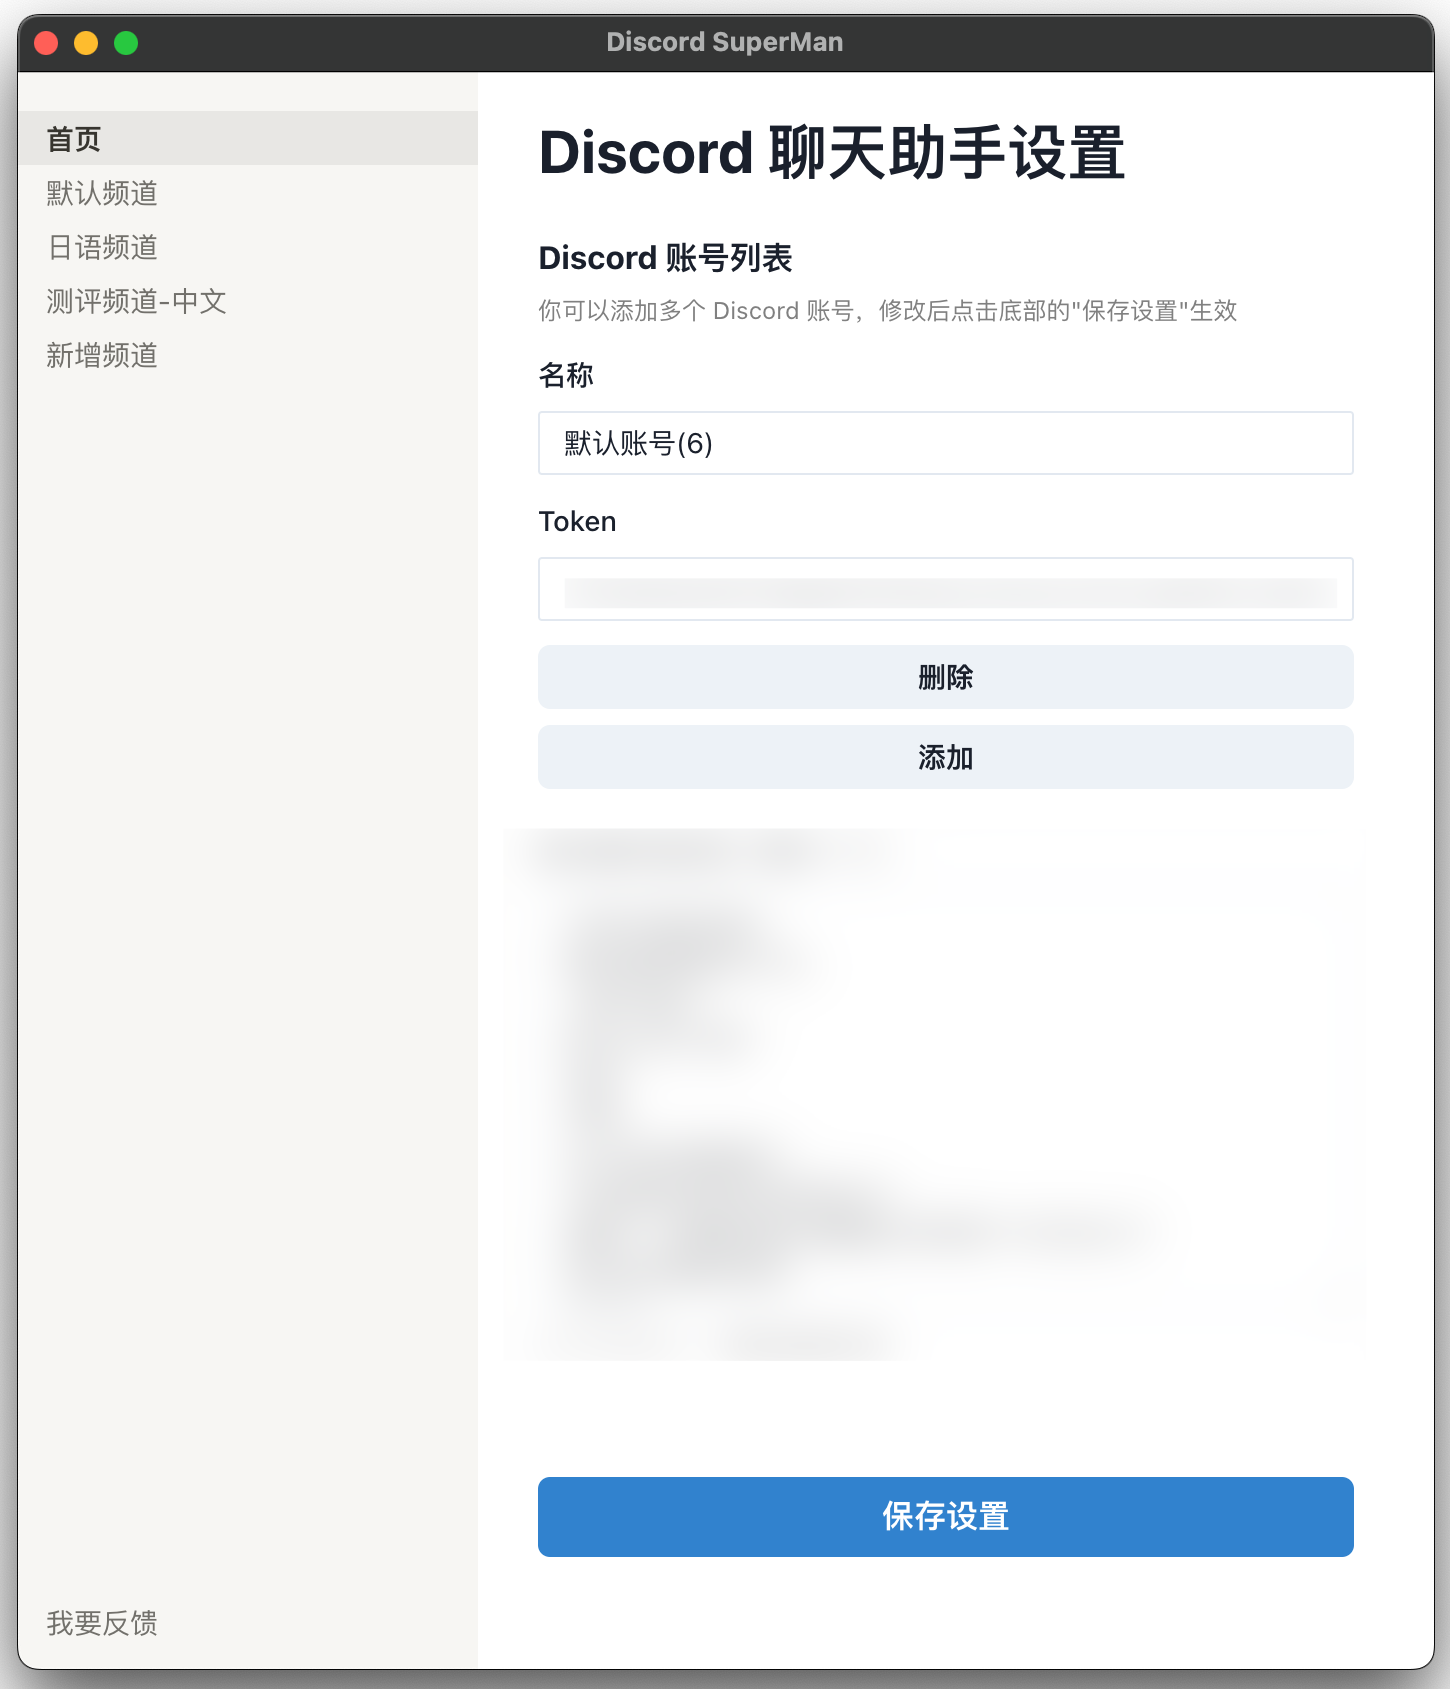 Discord chat assistant homepage - global configuration